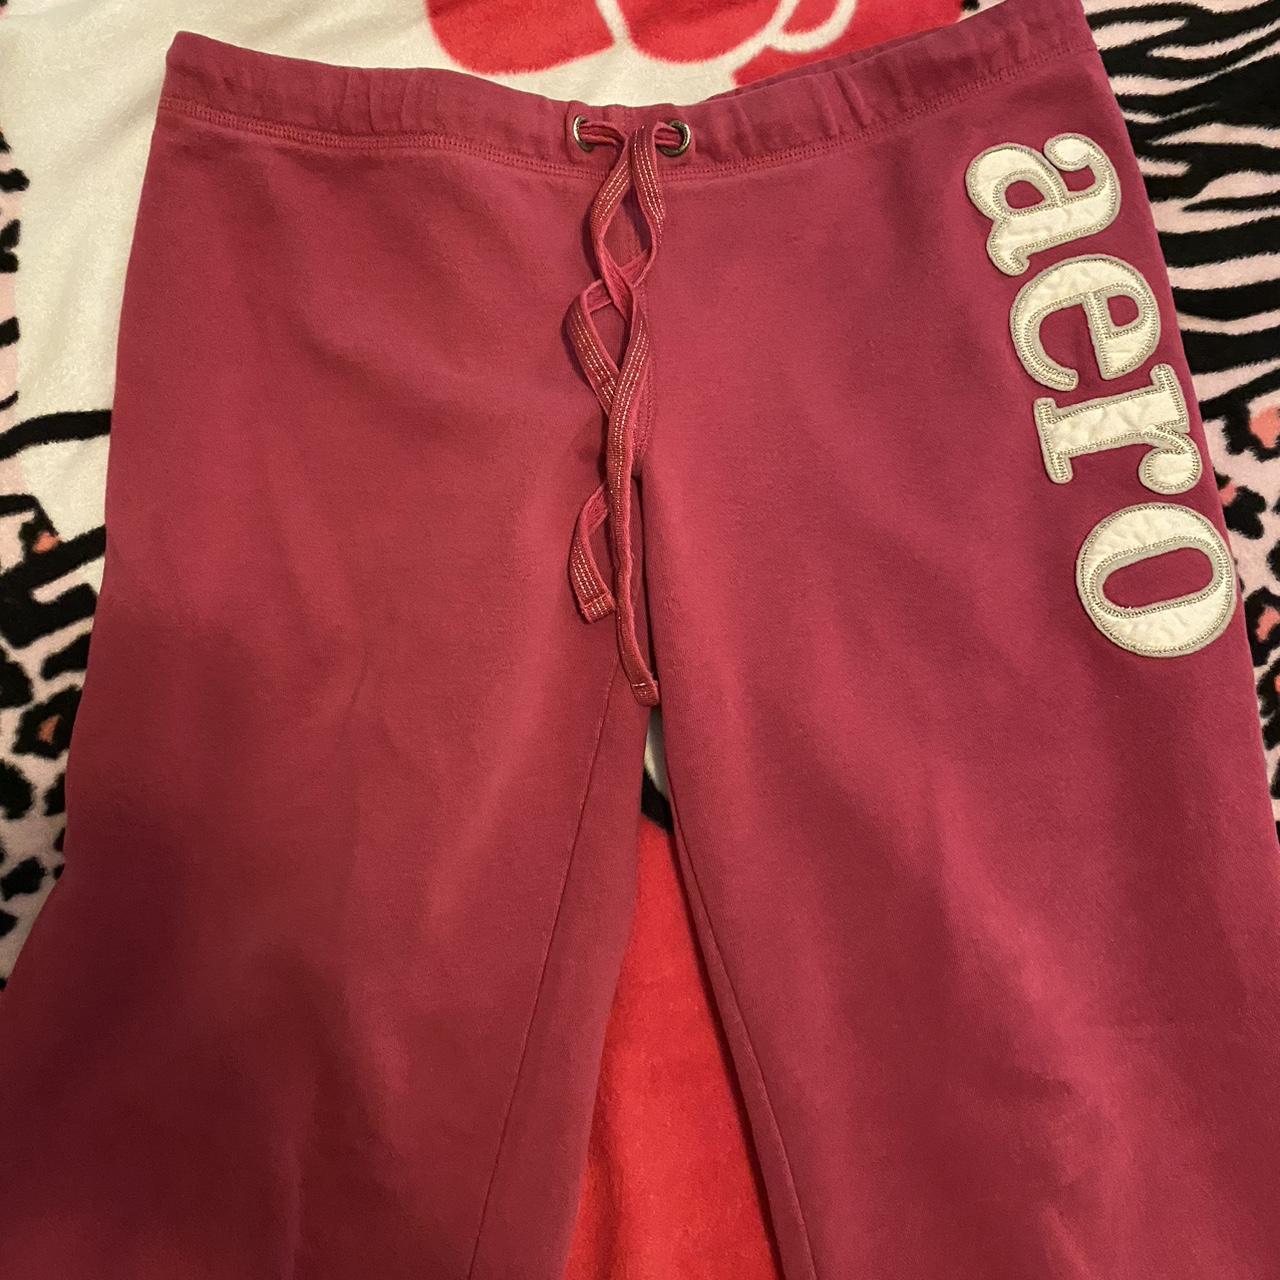 Aeropostale Women's Pink and White Joggers-tracksuits (5)